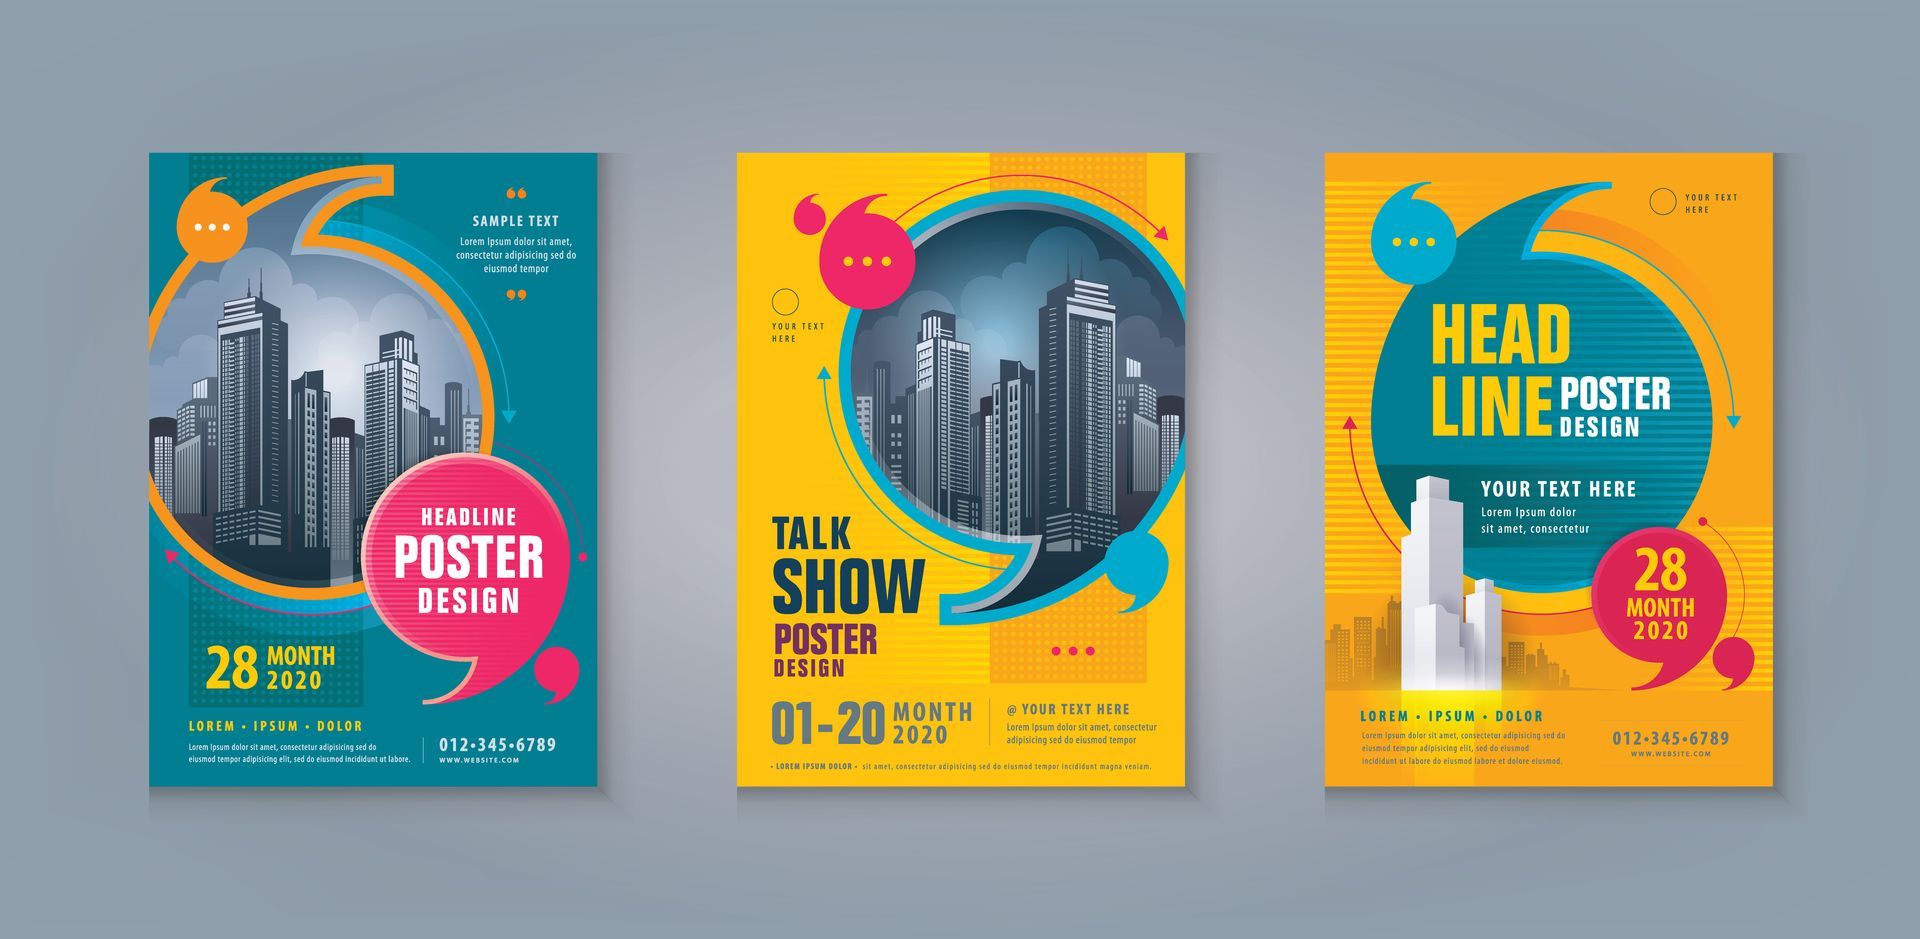 Scottsdale Custom Posters For Conferences & Trade Shows